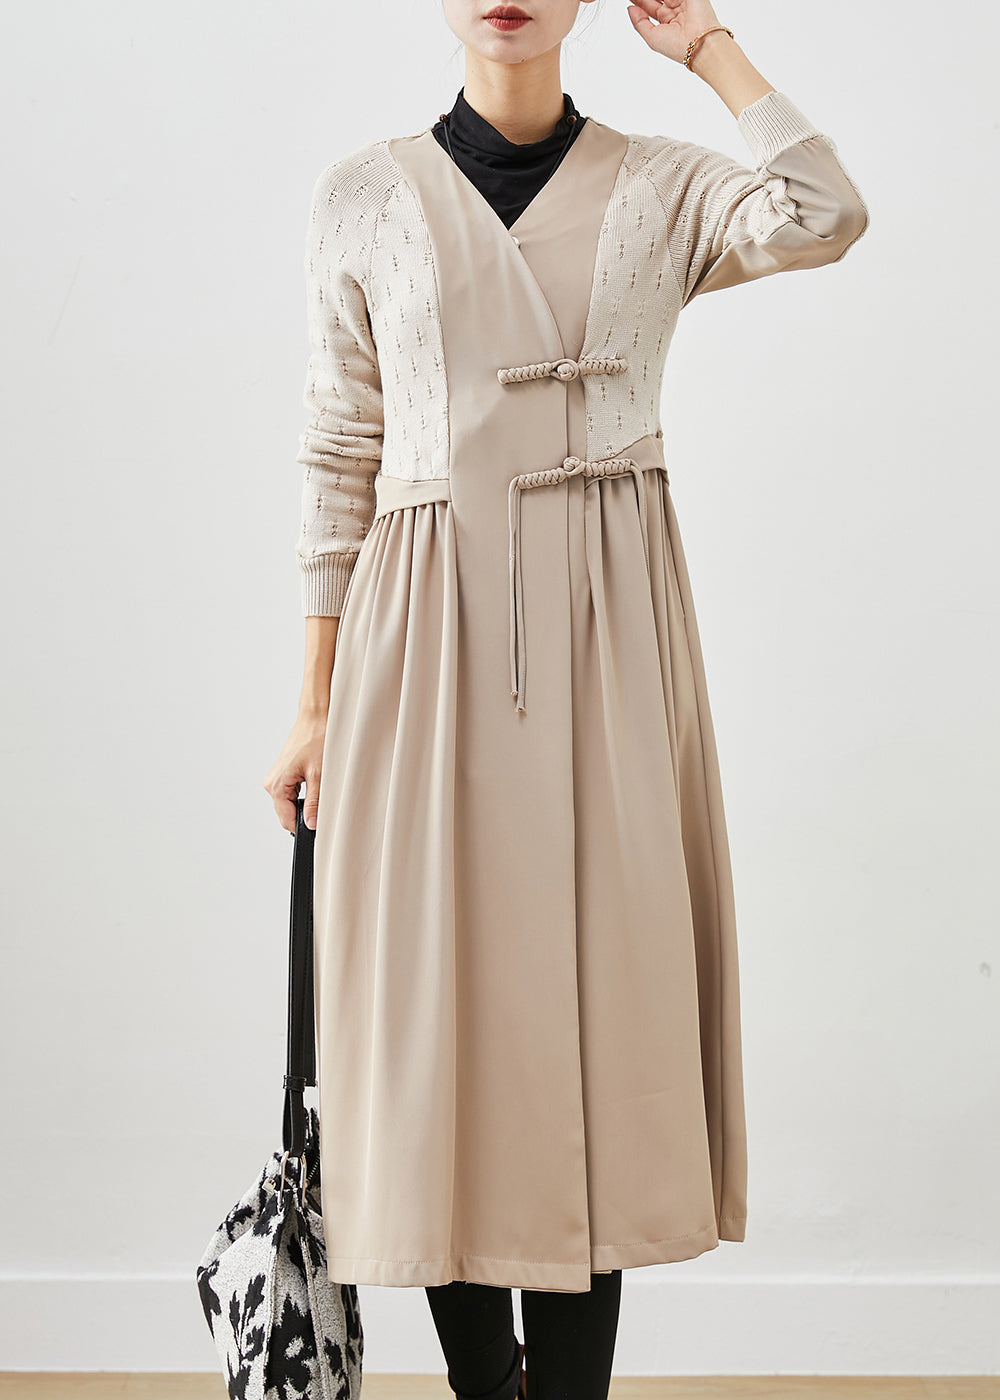 Classy Beige Chinese Button Knit Patchwork Cotton Long Dress Fall